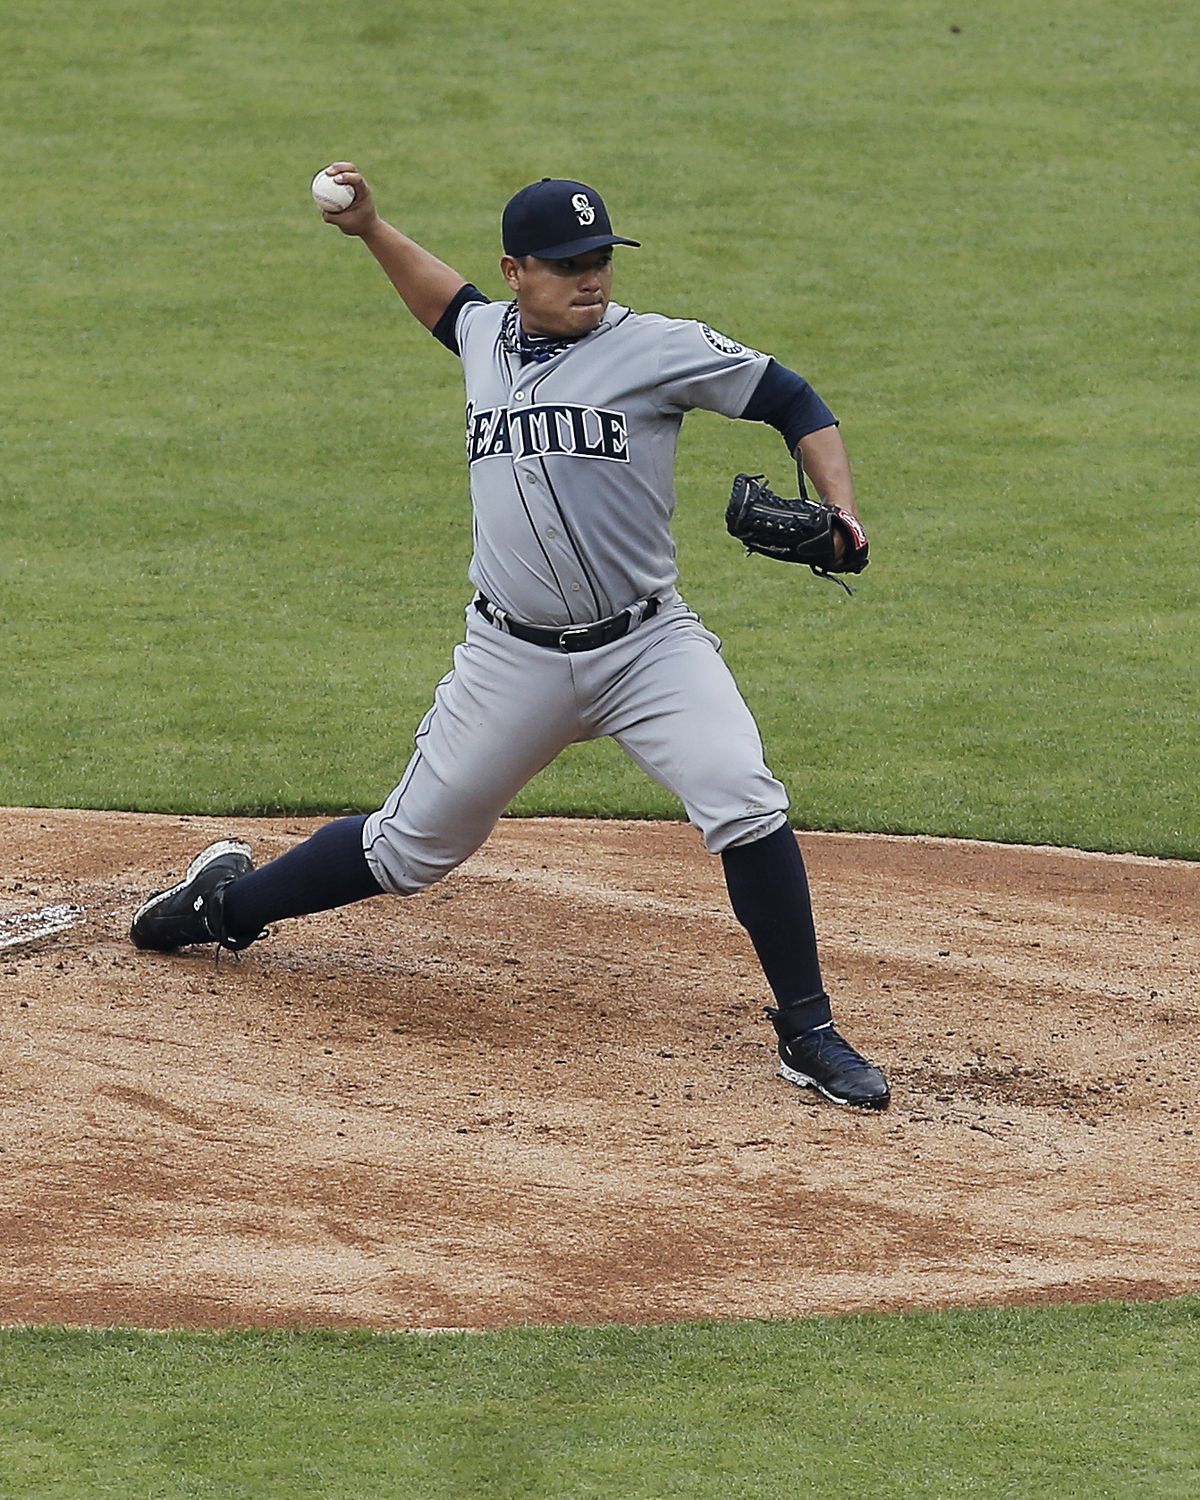 Mariners starting pitcher Erasmo Ramirez lasted just two innings against Texas. (Associated Press)